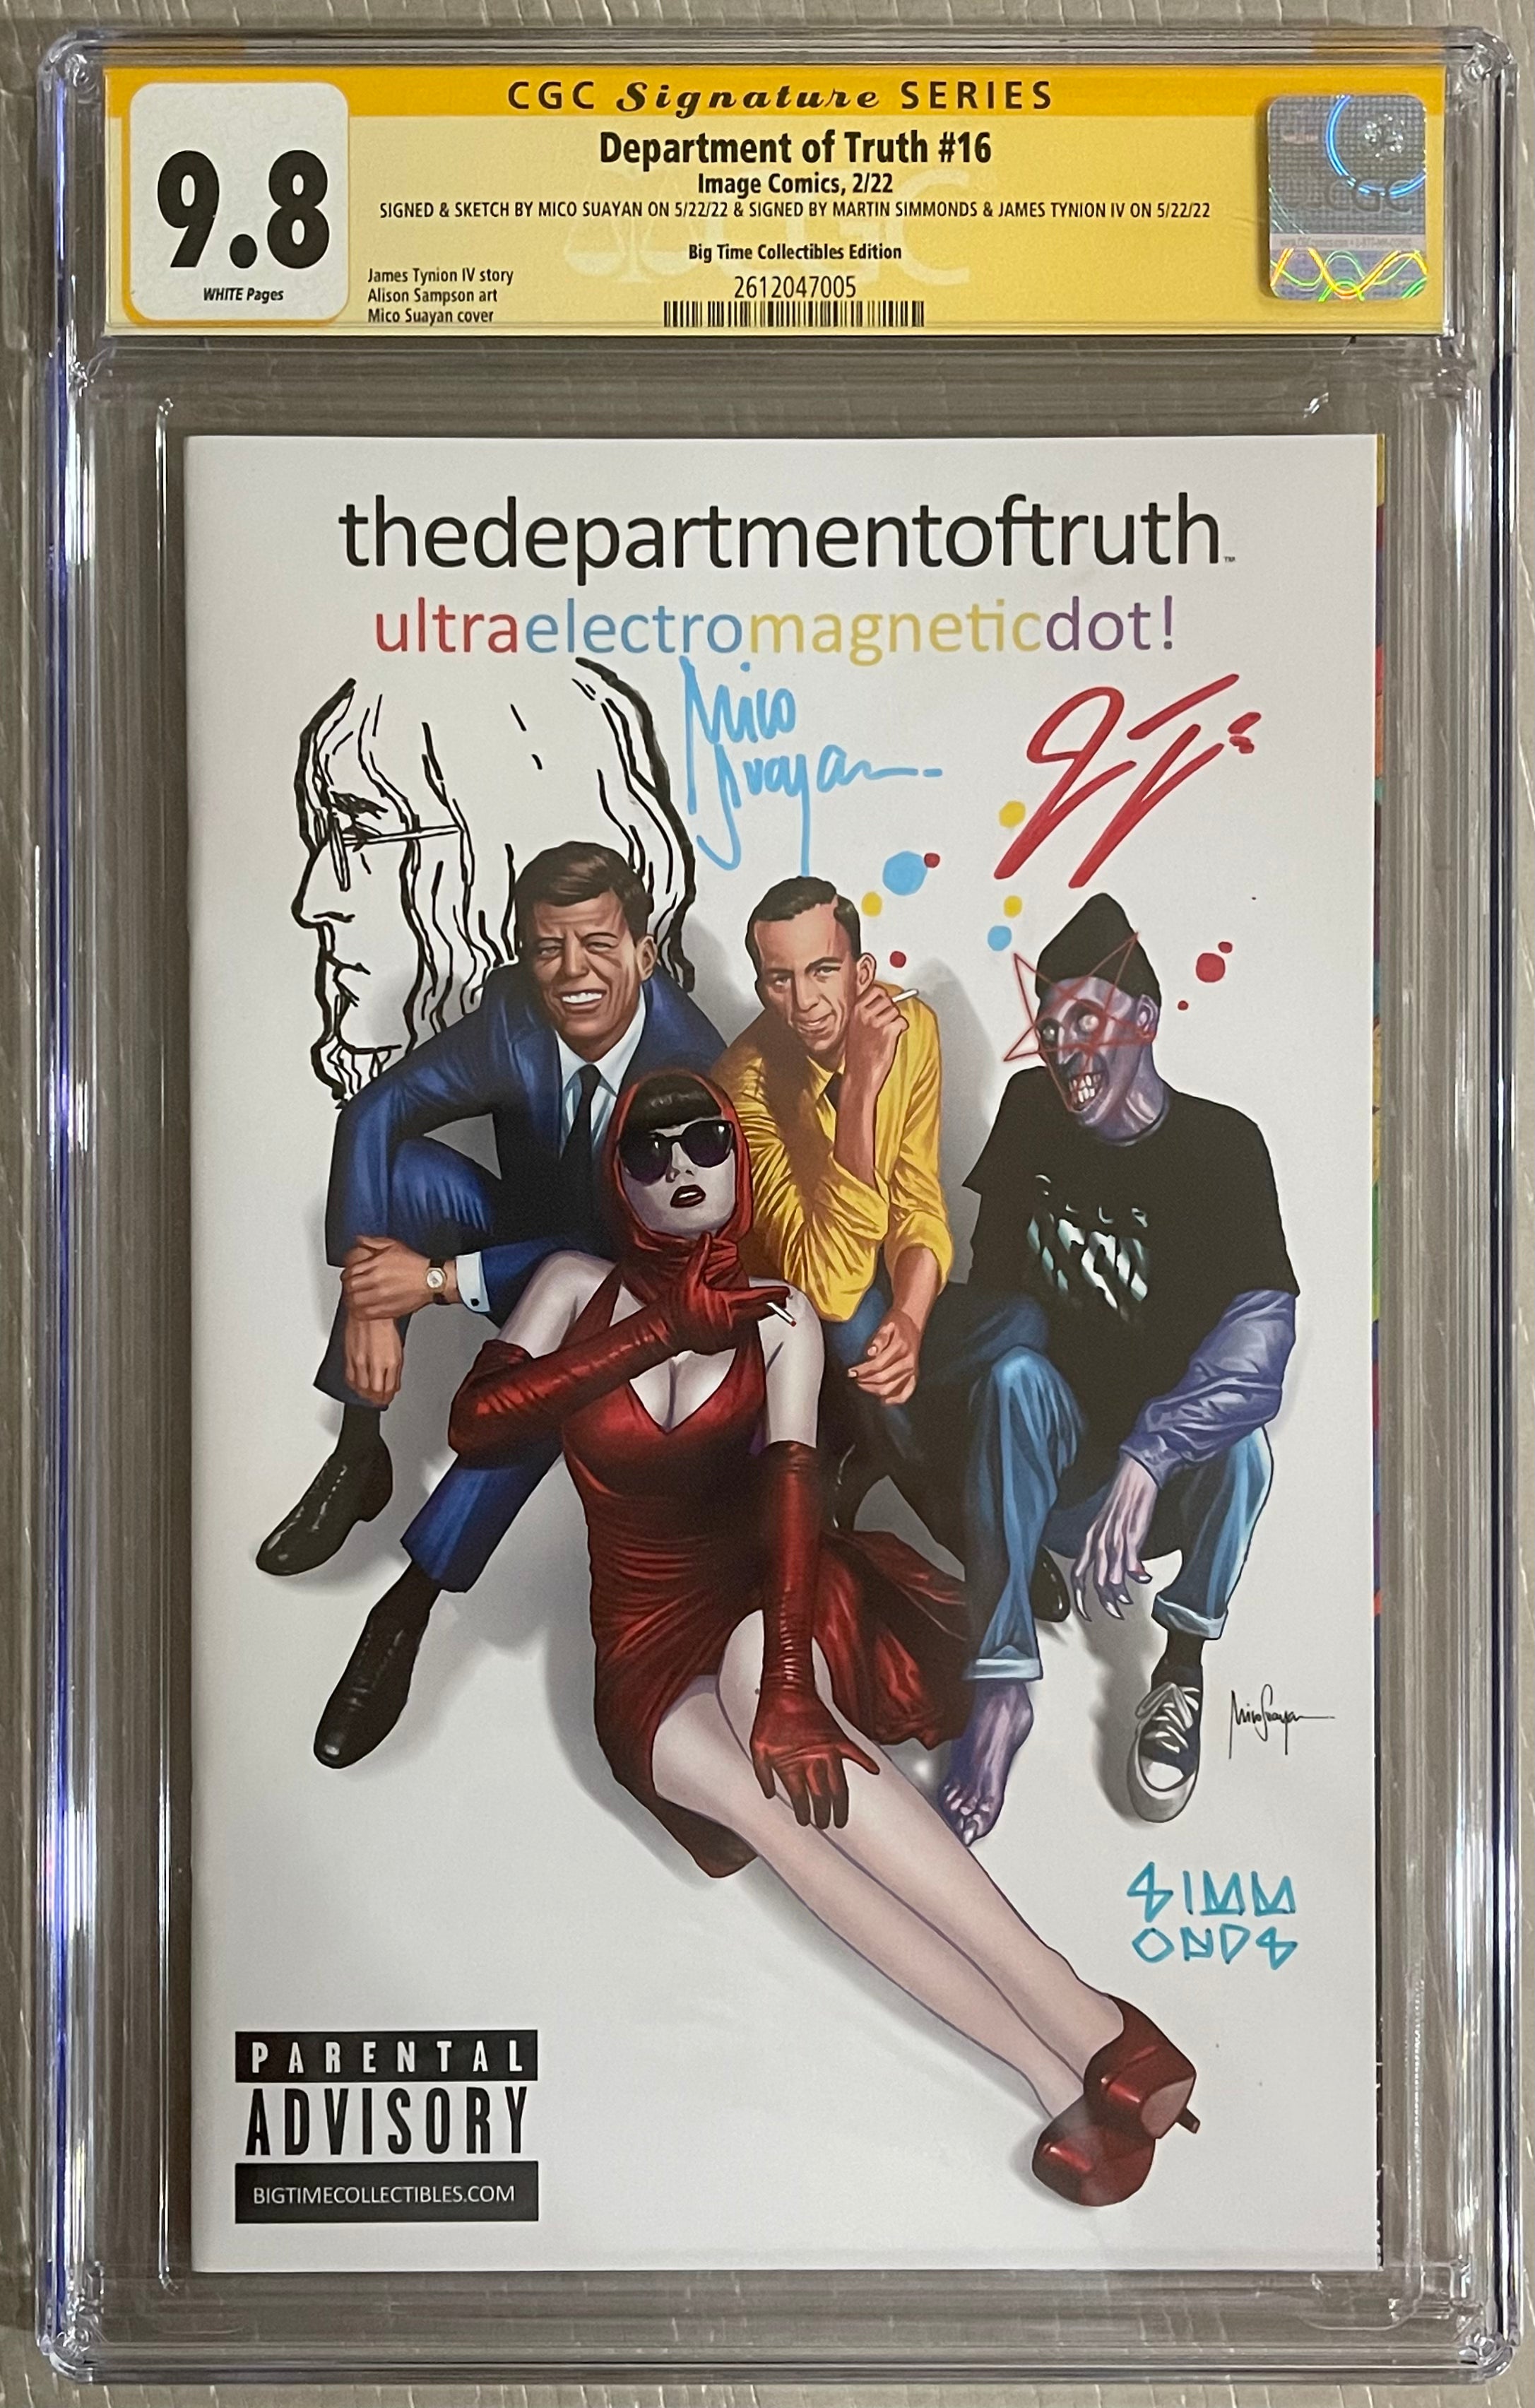 DEPARTMENT OF TRUTH #16 EXCLUSIVE CGC 9.8 SIGNED & REMARKED (JOHN LENNON) BY MICO SUAYAN, SIGNED BY MARTIN SIMMONDS & JAMES TYNION IV